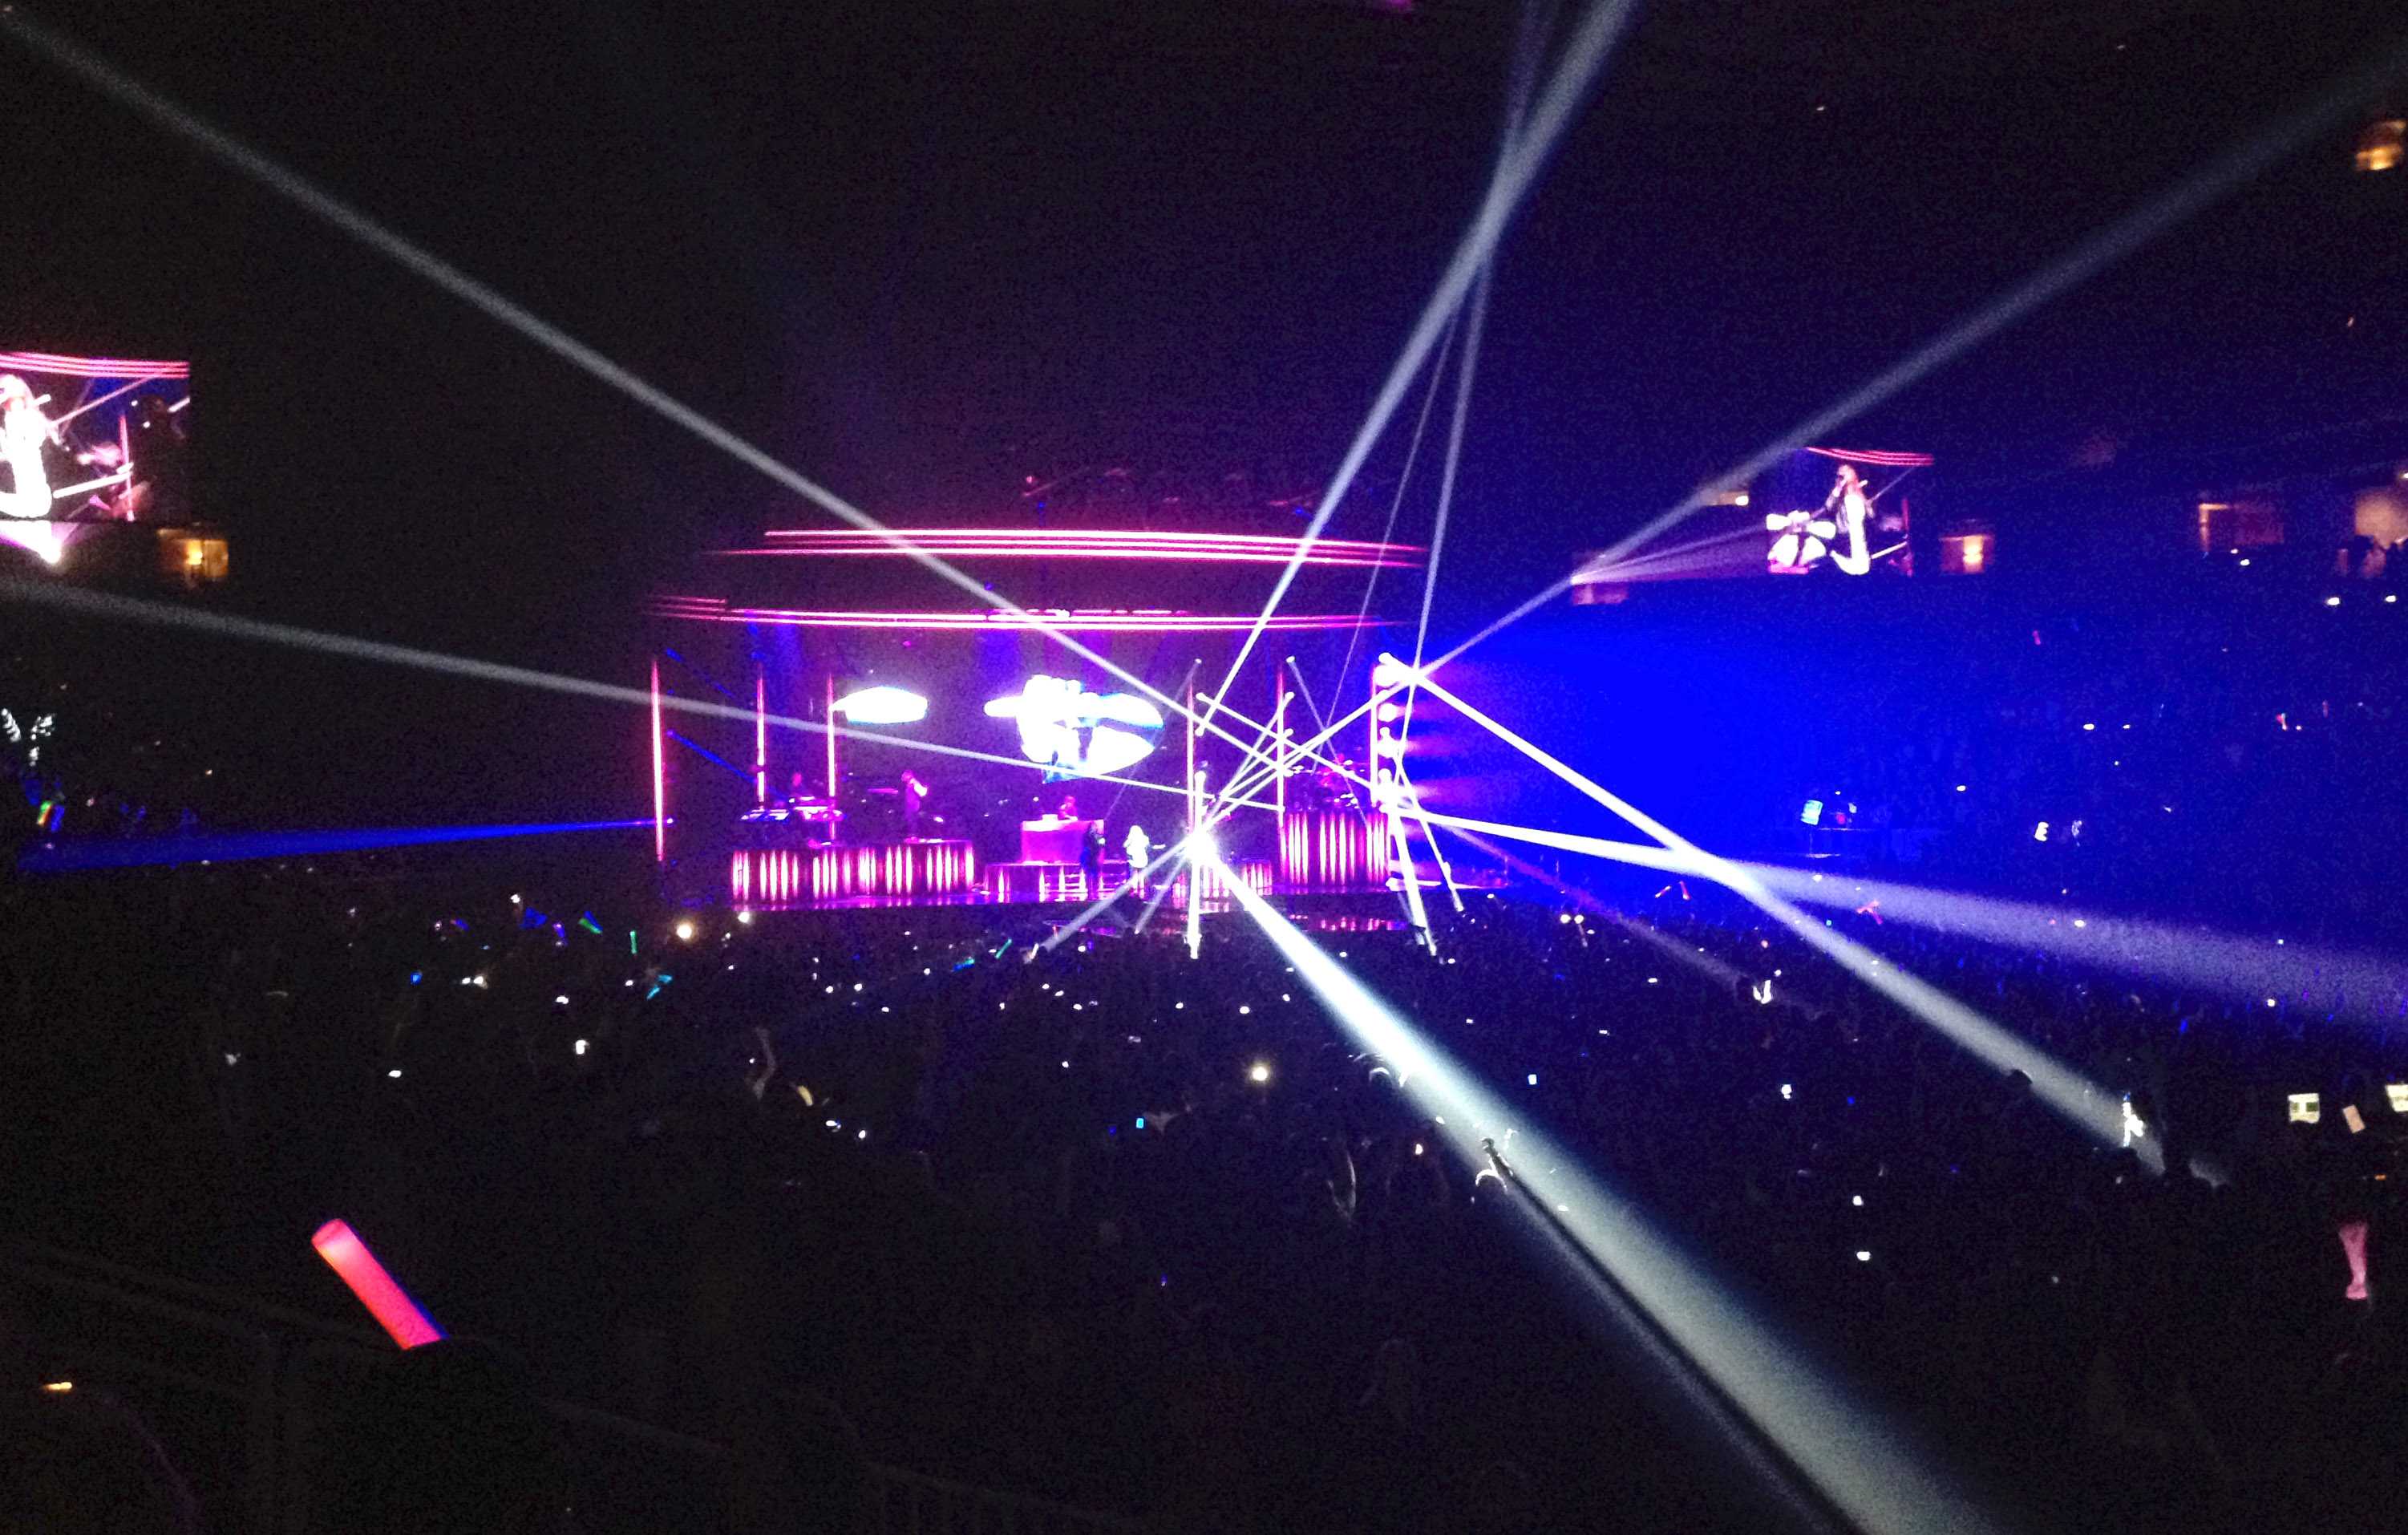 Demi Lovato sings on stage while the stage lights shine into the crowd.